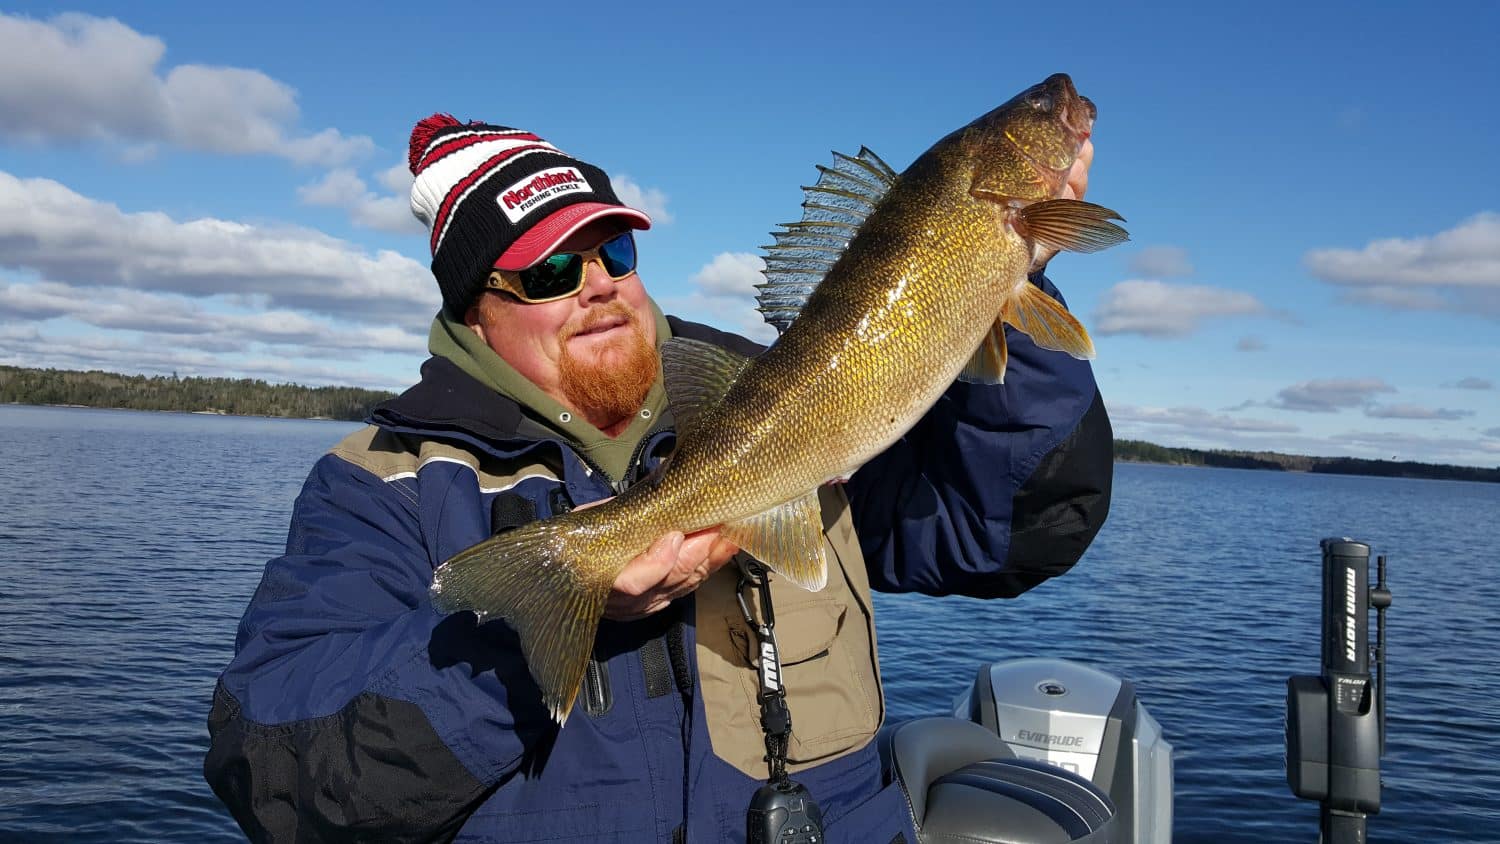 Ice out lake trout fishing in Ontario, Canada